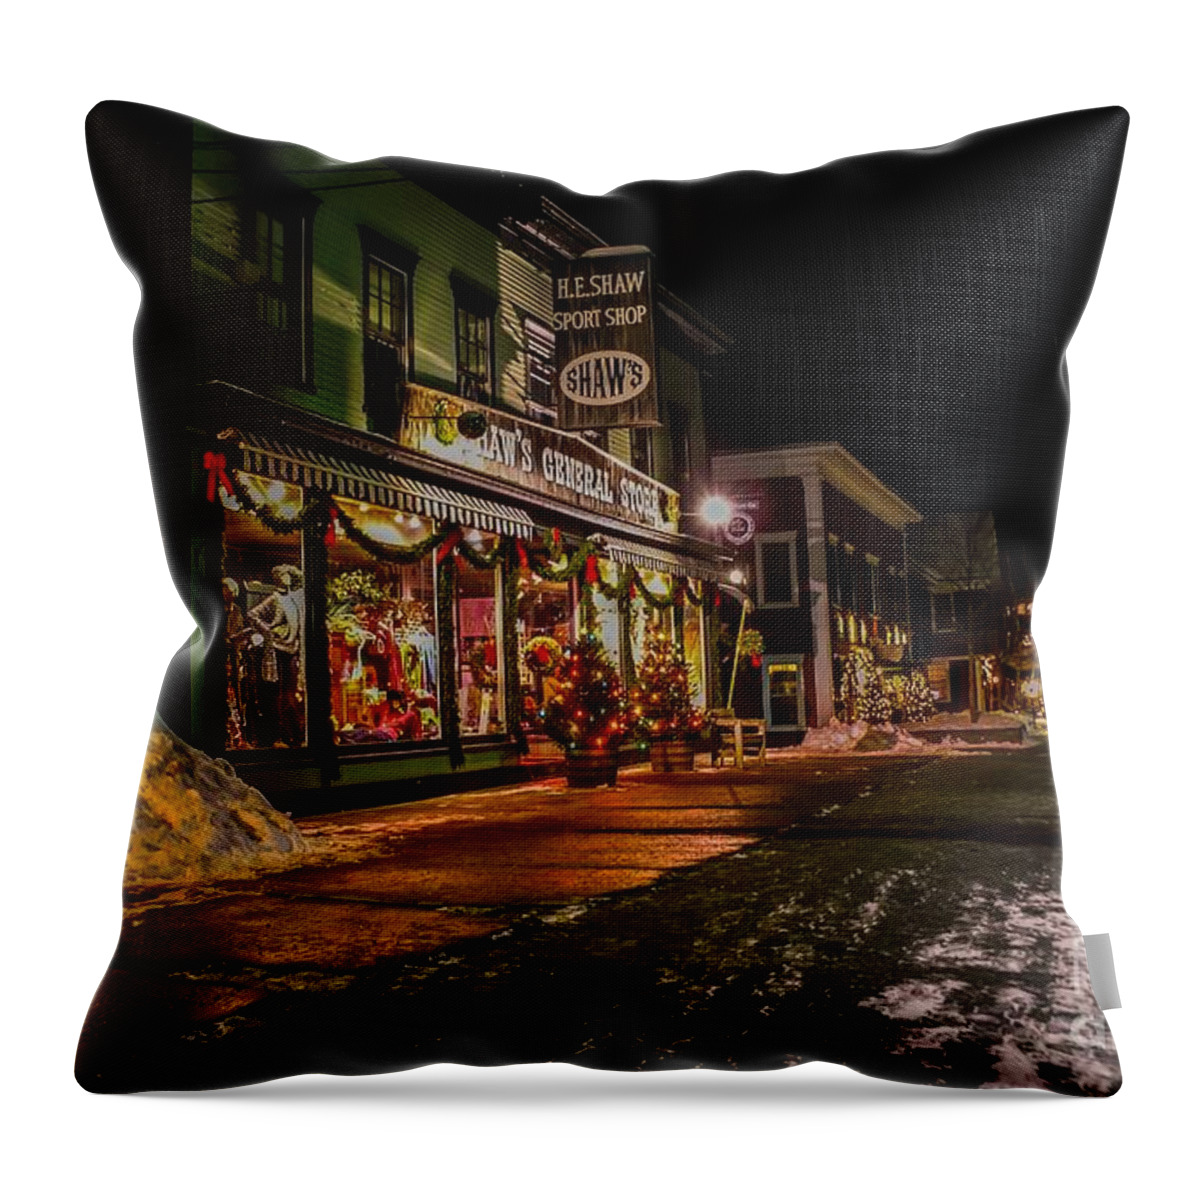 Stowe Throw Pillow featuring the photograph Shaws Sports Store. by New England Photography